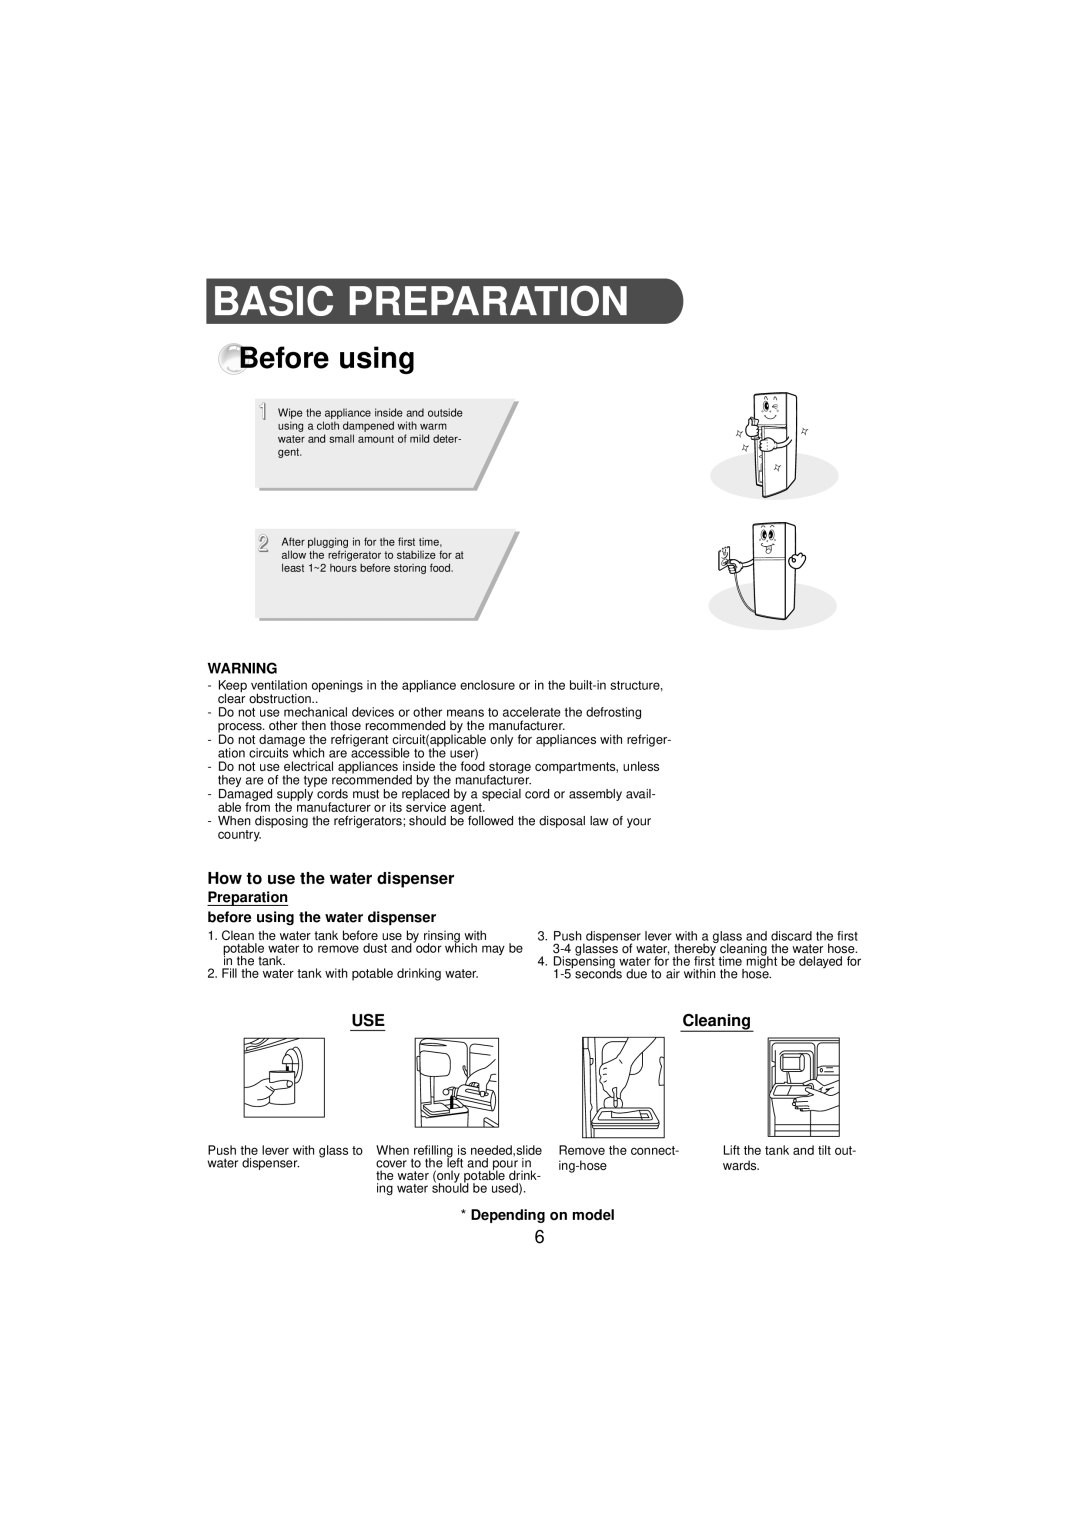 Samsung SR210NME manual Basic Preparation, Before using, How to use the water dispenser, Cleaning, Depending on model 